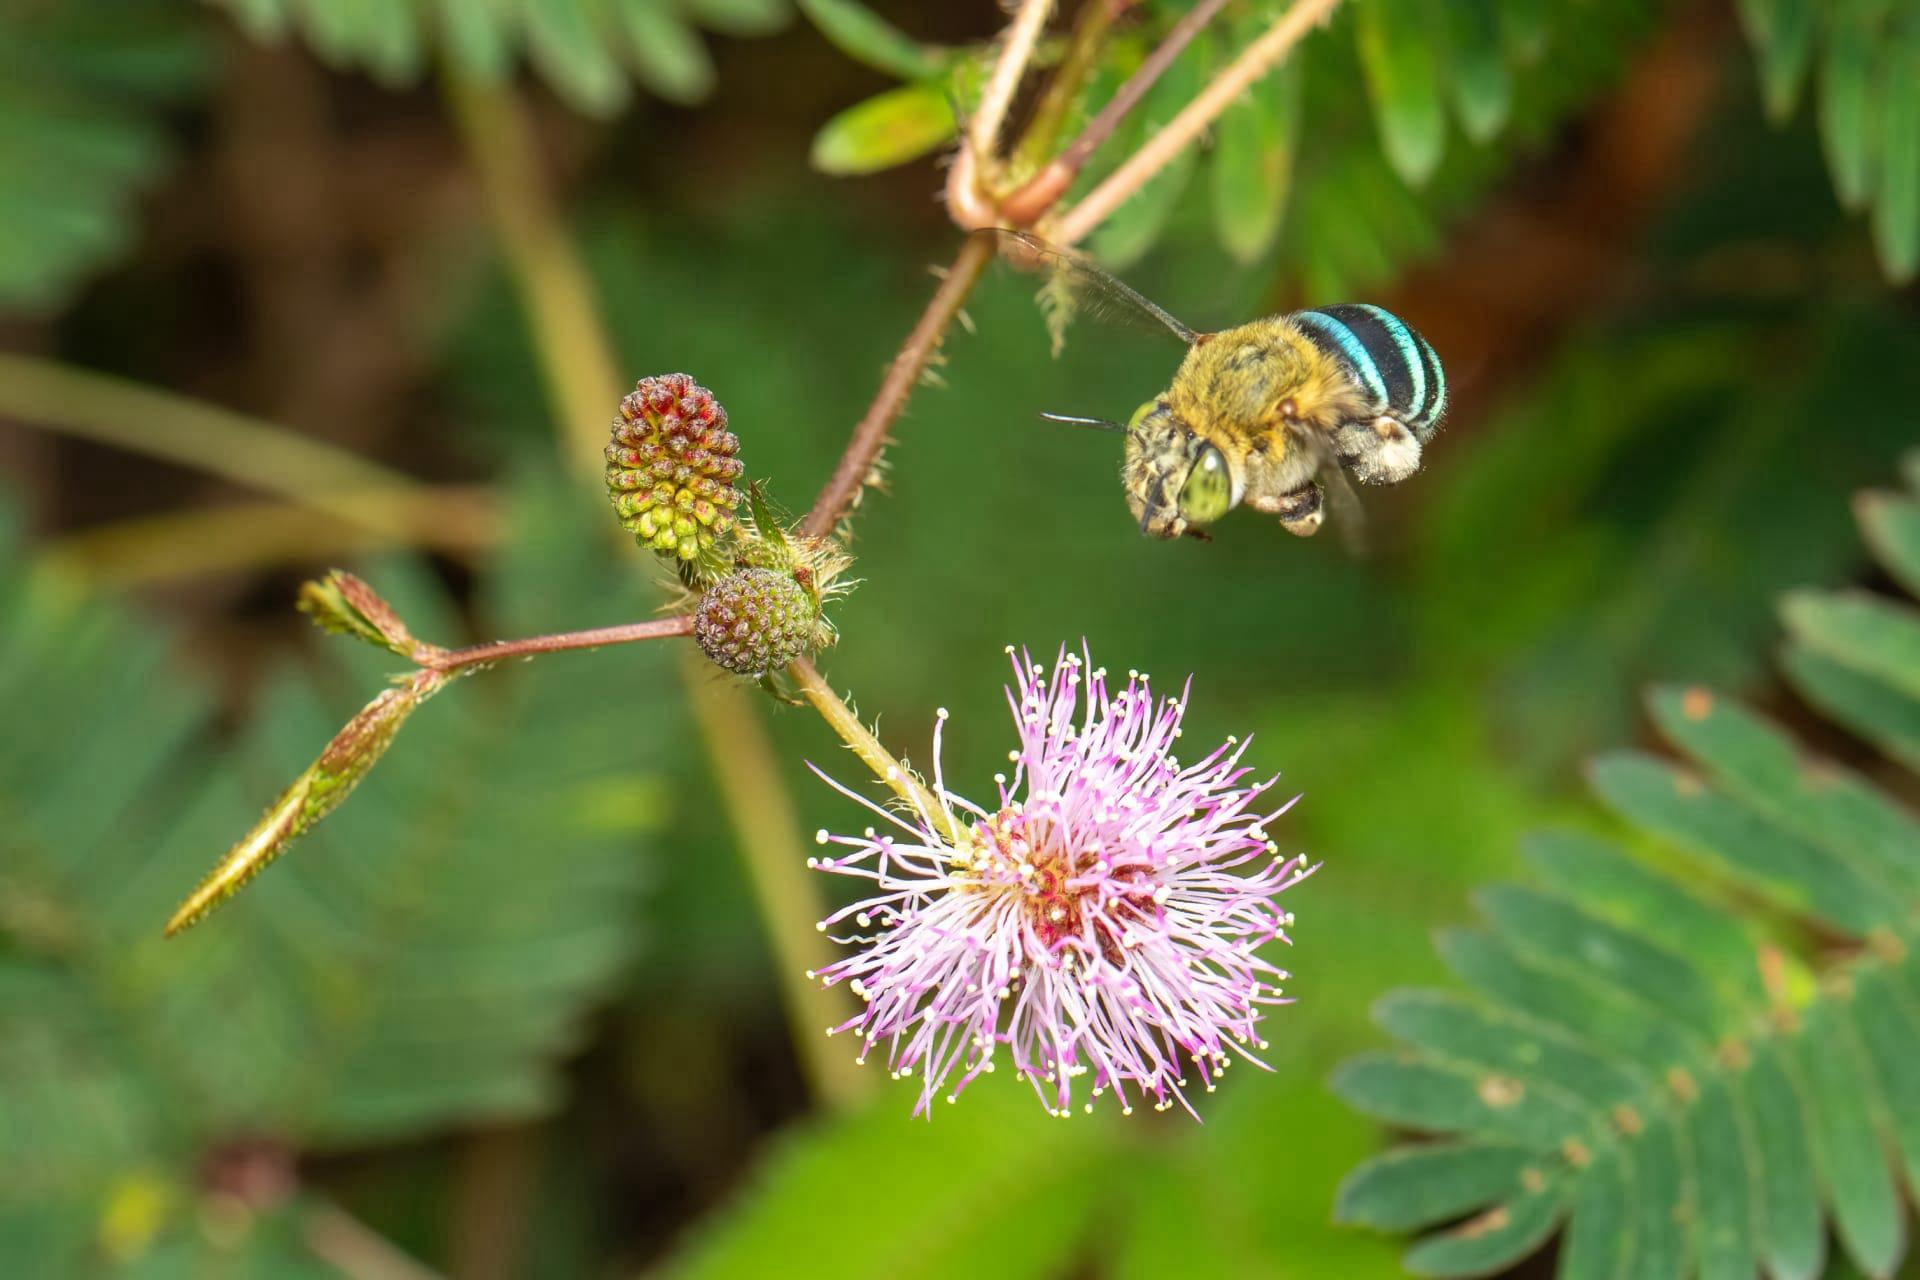 Blue banded bee pictures